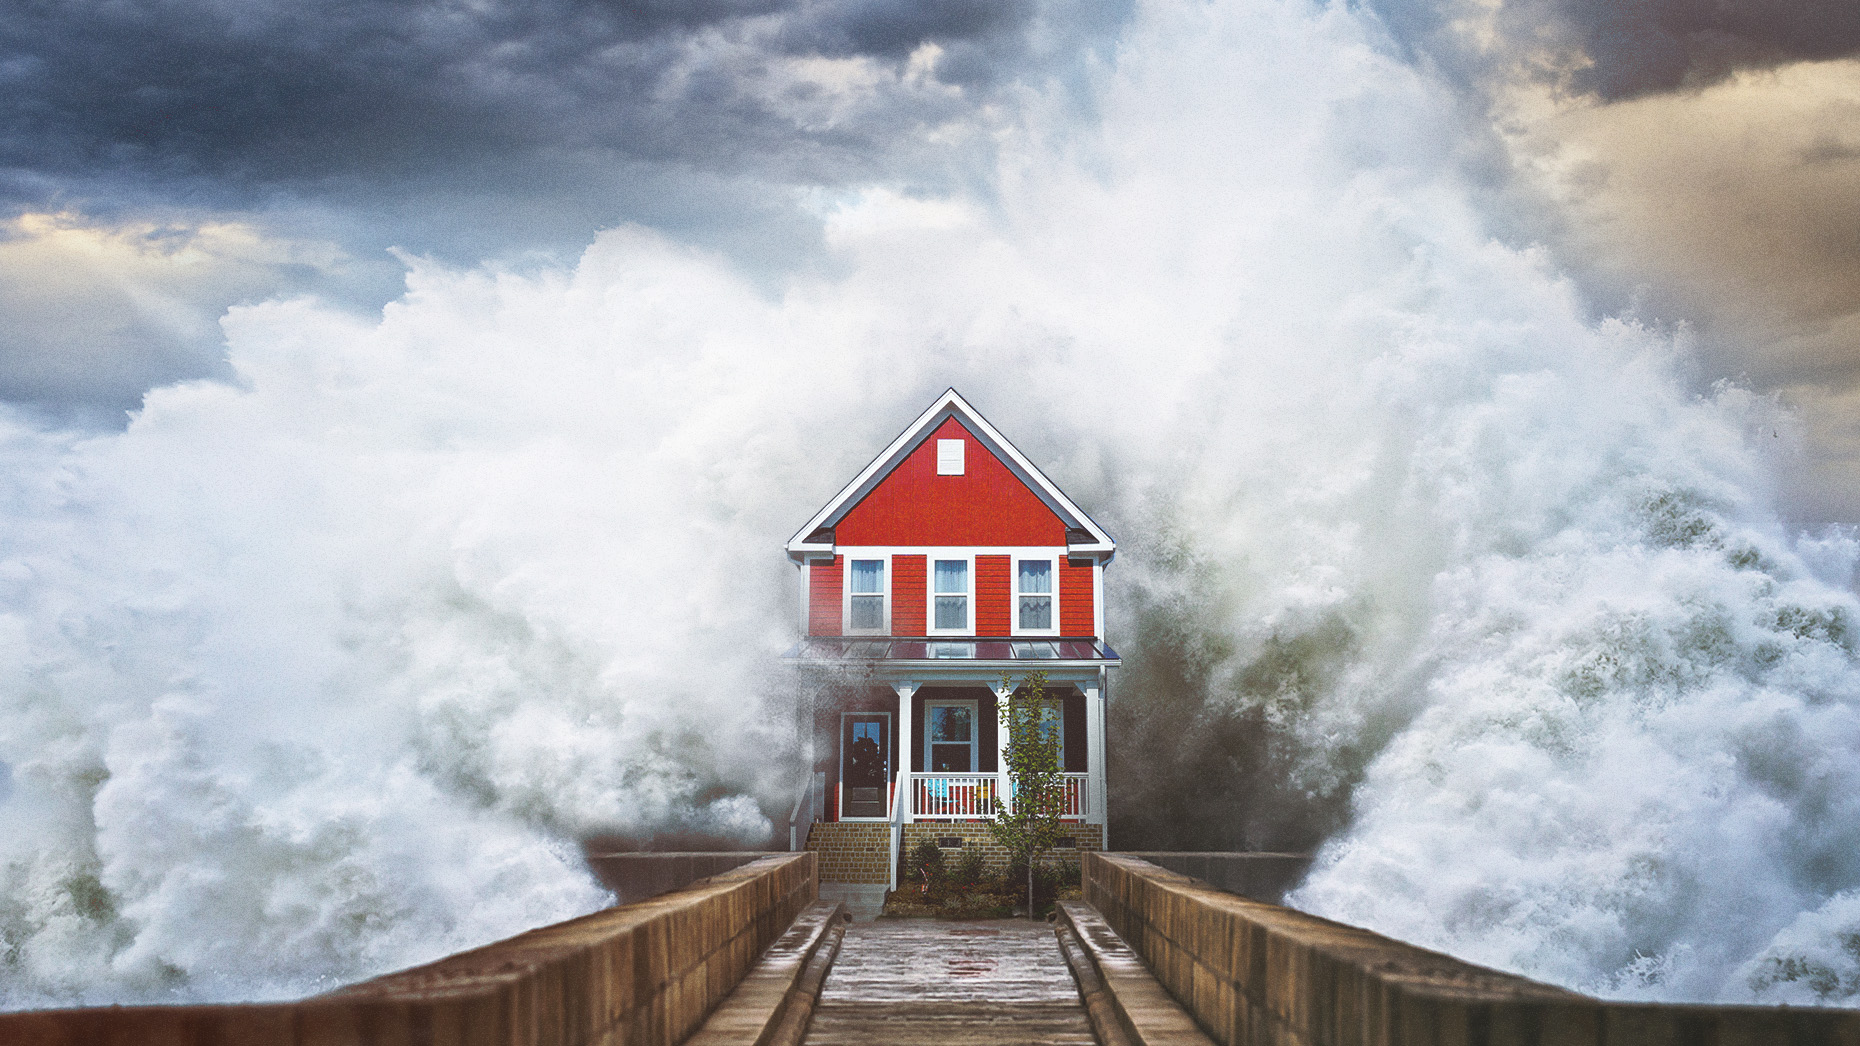 Home Being Hit by Giant Wave